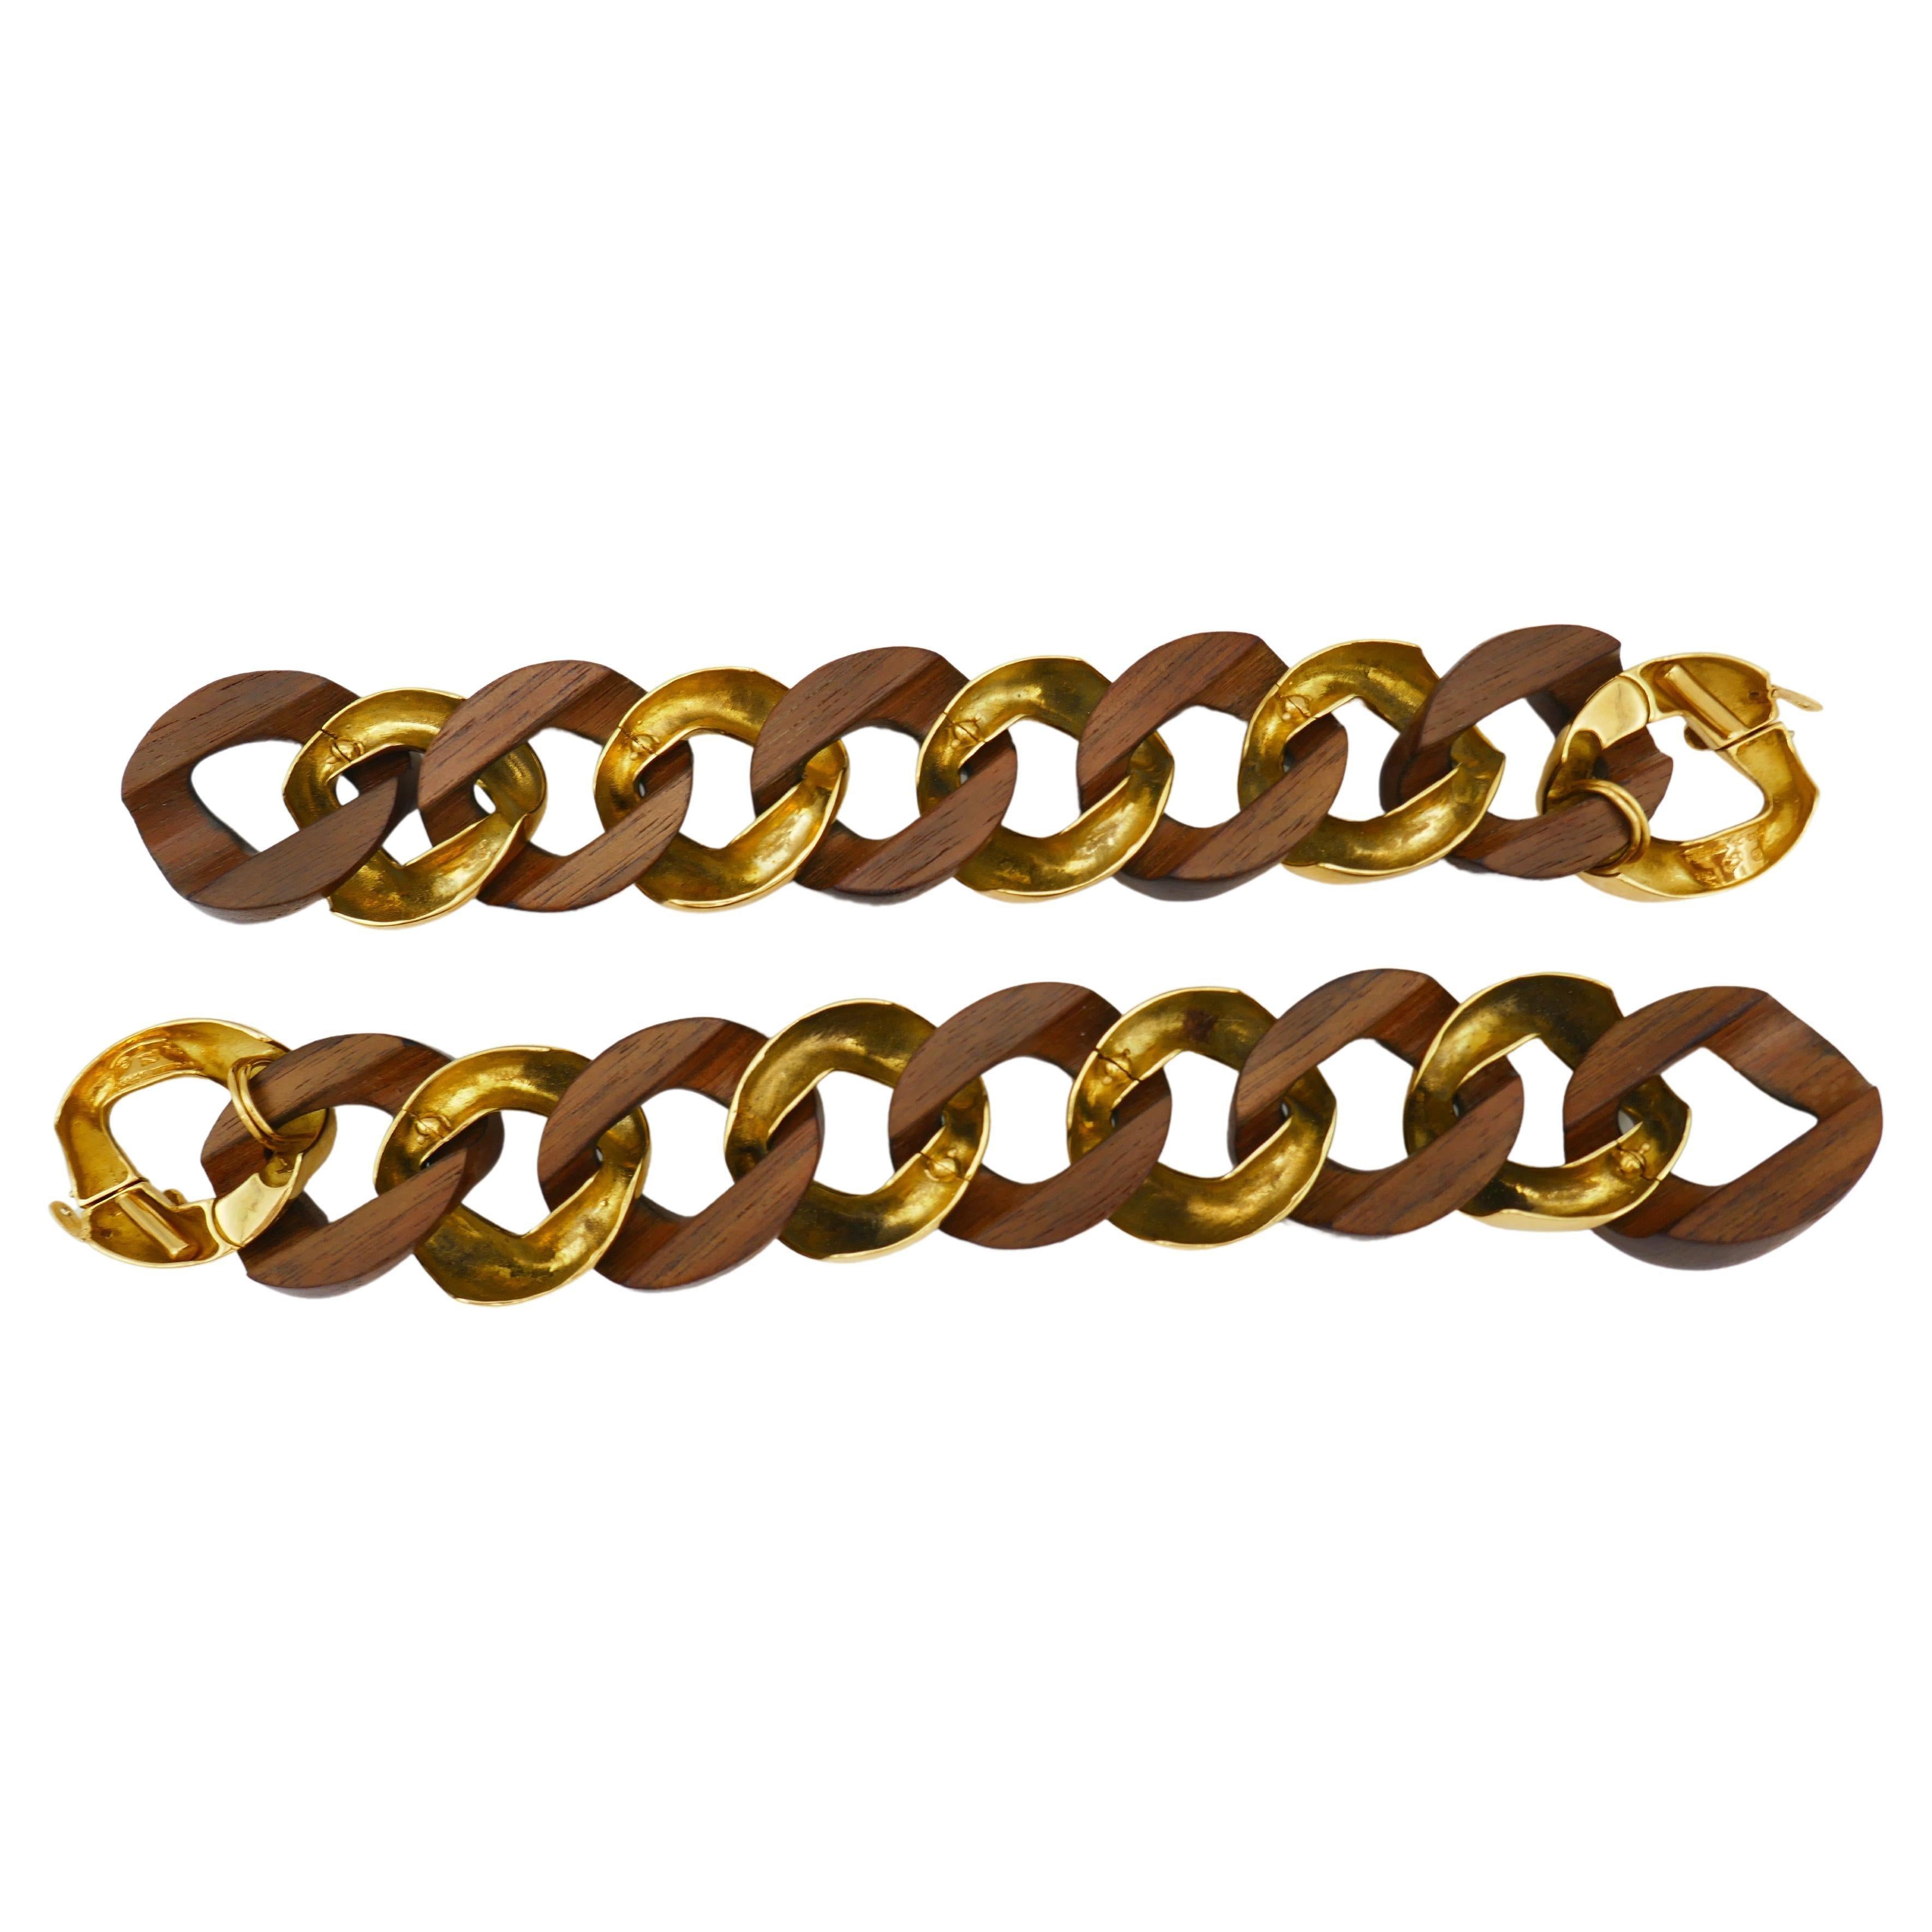 Seaman Schepps Vintage Gold Wood Curb Link Bracelet Duo/ Necklace In Excellent Condition For Sale In Beverly Hills, CA